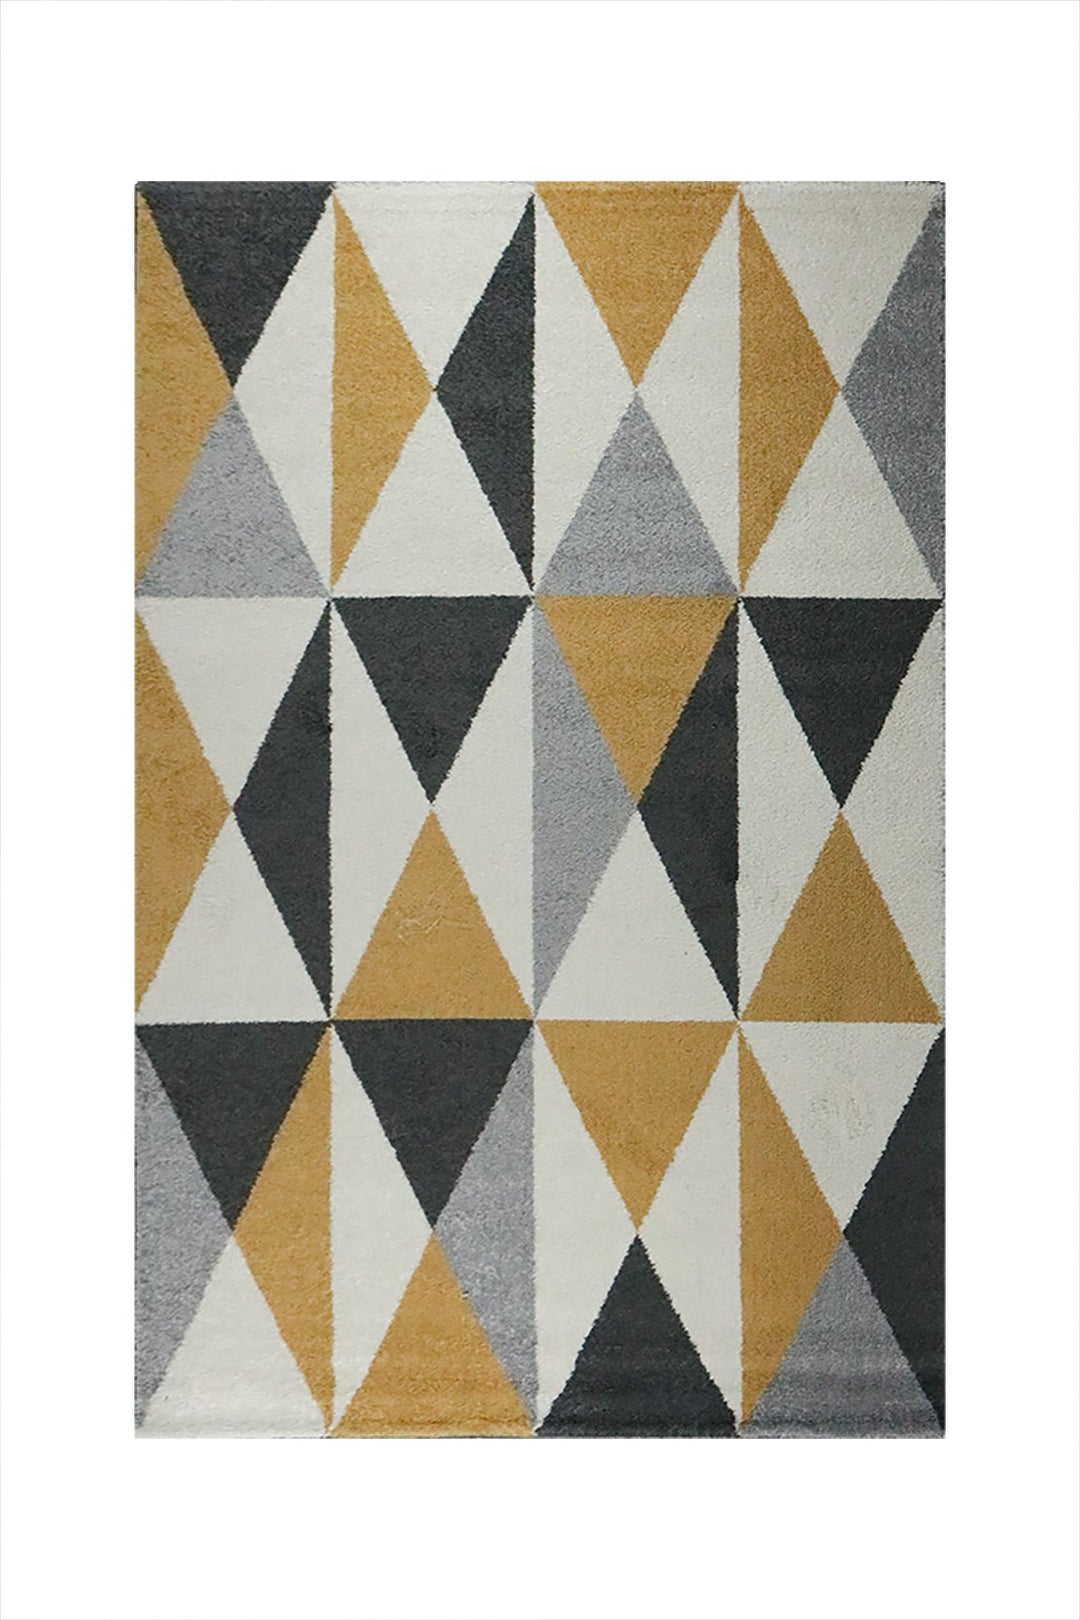 Turkish Modern Festival WD Rug - 4.9 x 6.5 FT - Cream and Yellow - Sleek and Minimalist for Chic Interiors - V Surfaces